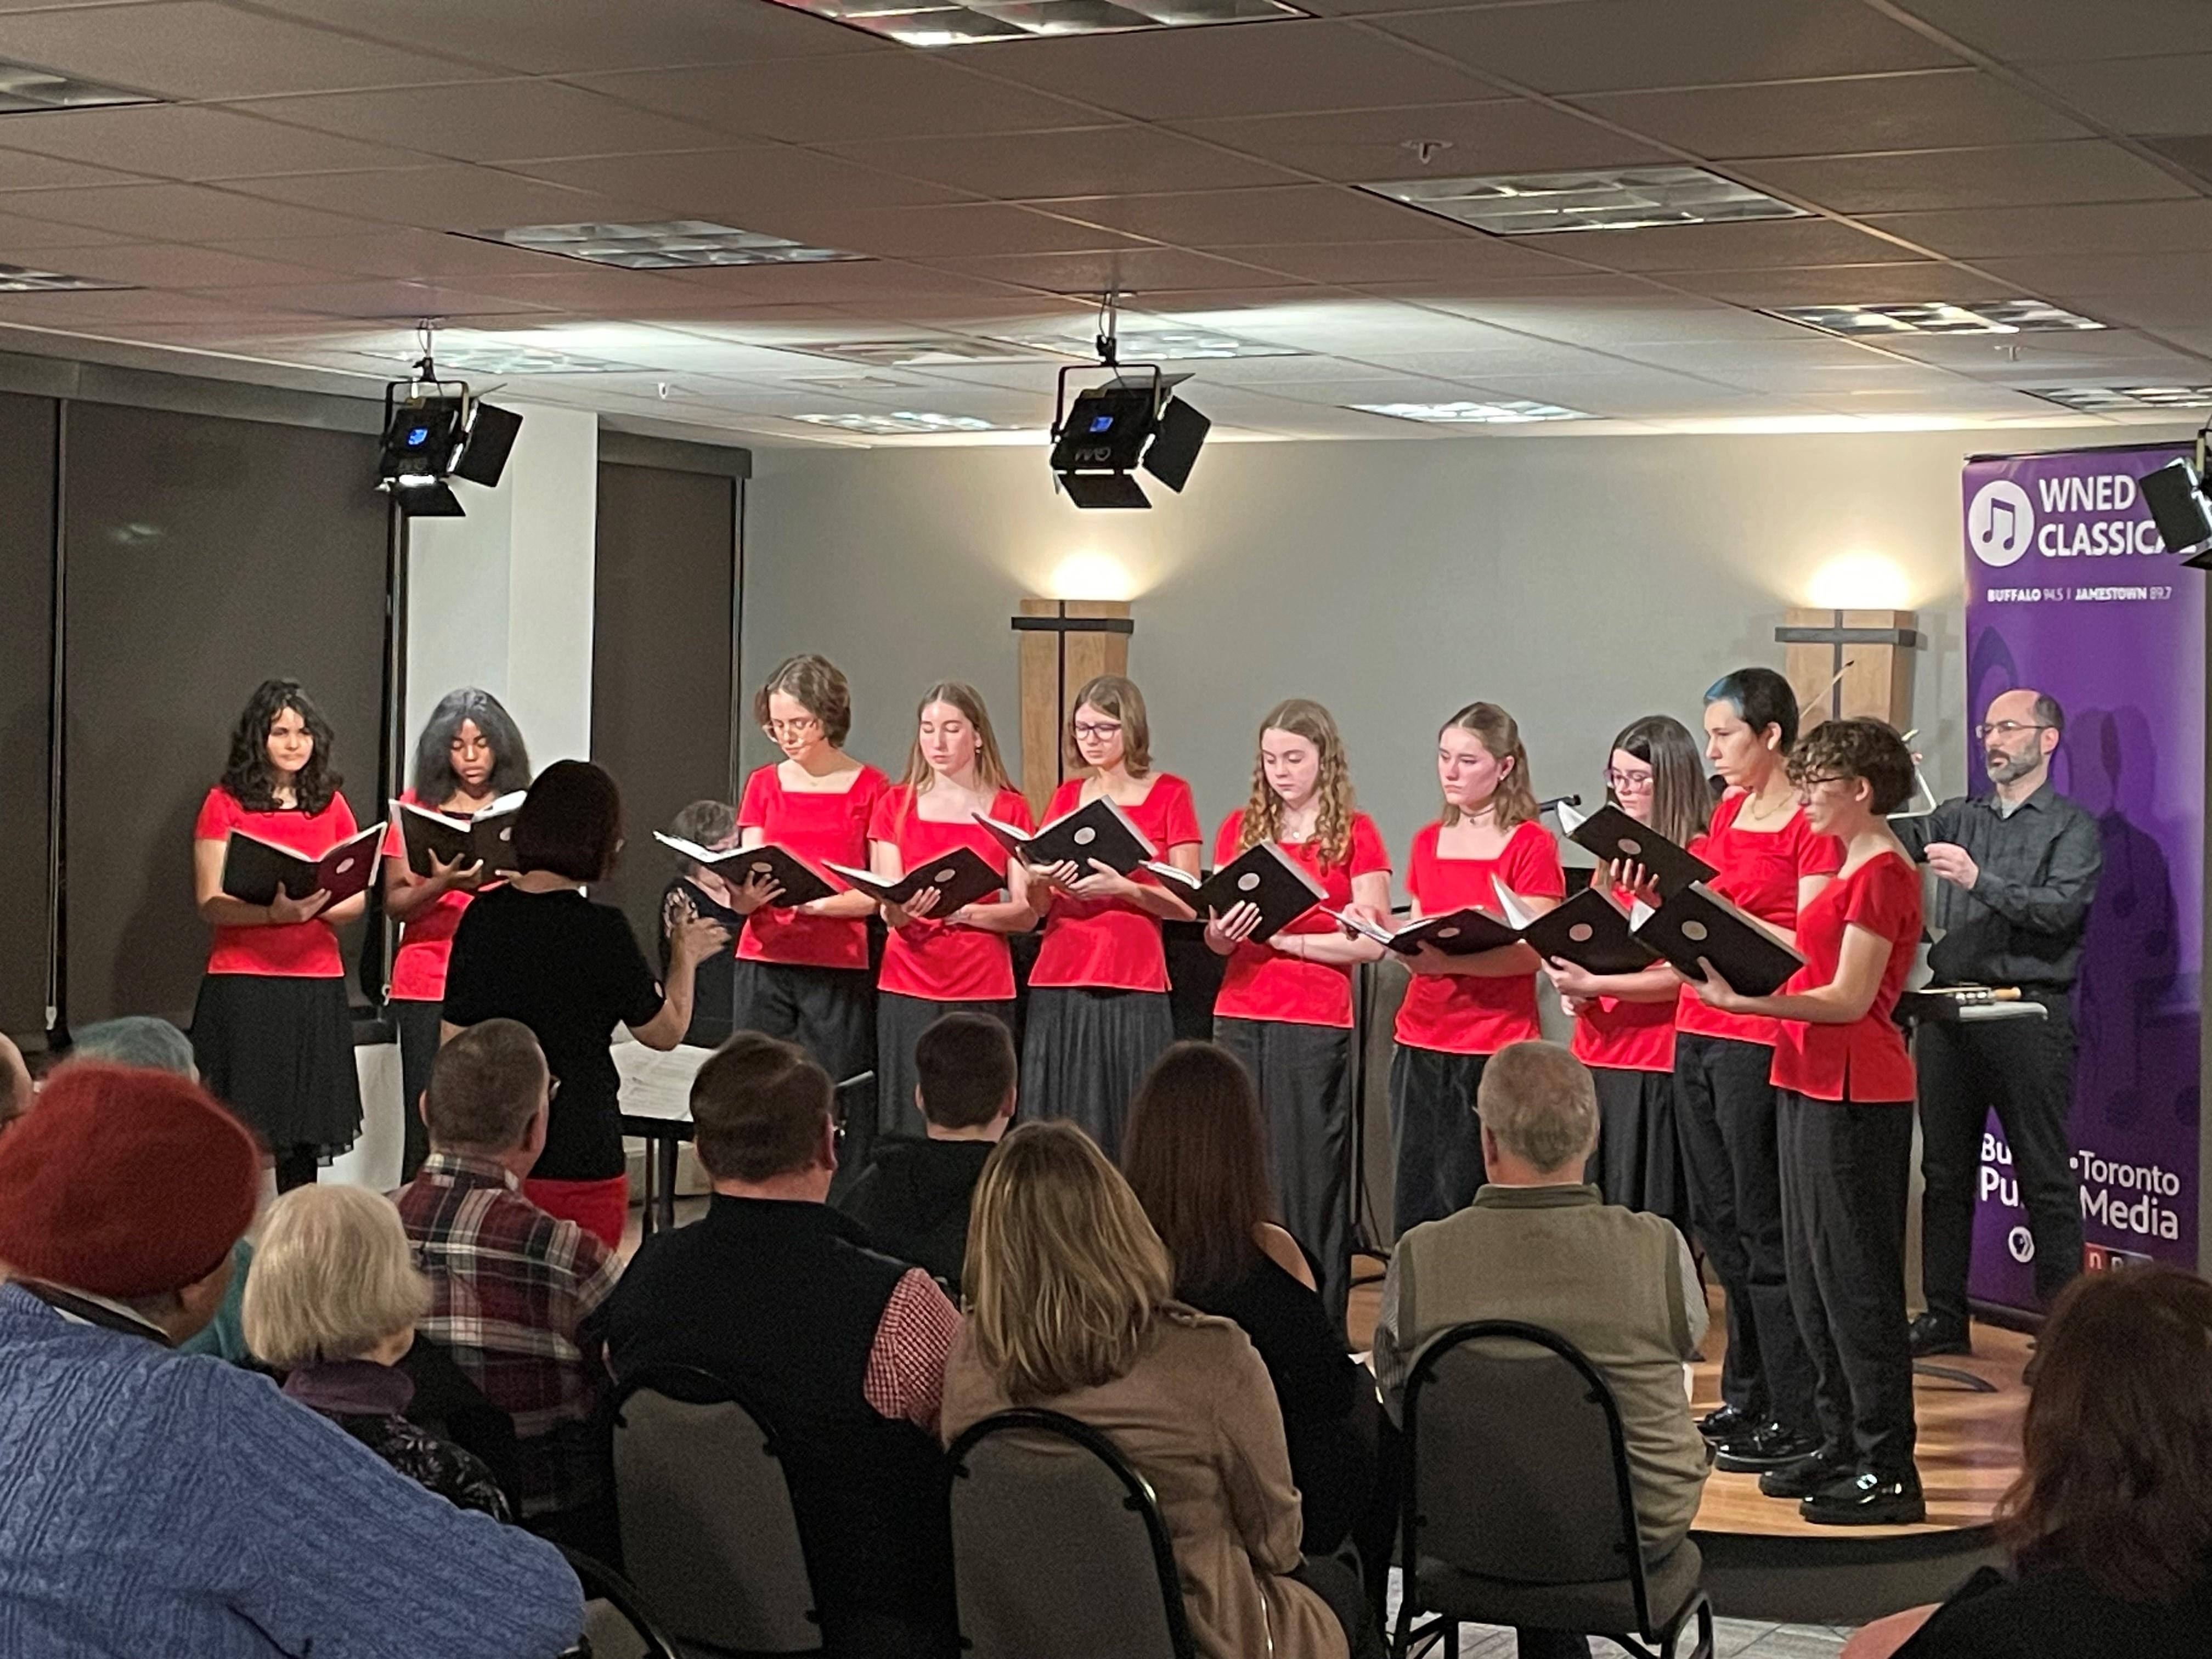 Buffalo Girl Choir (all wearing red shirts and black bottoms) performing onstage